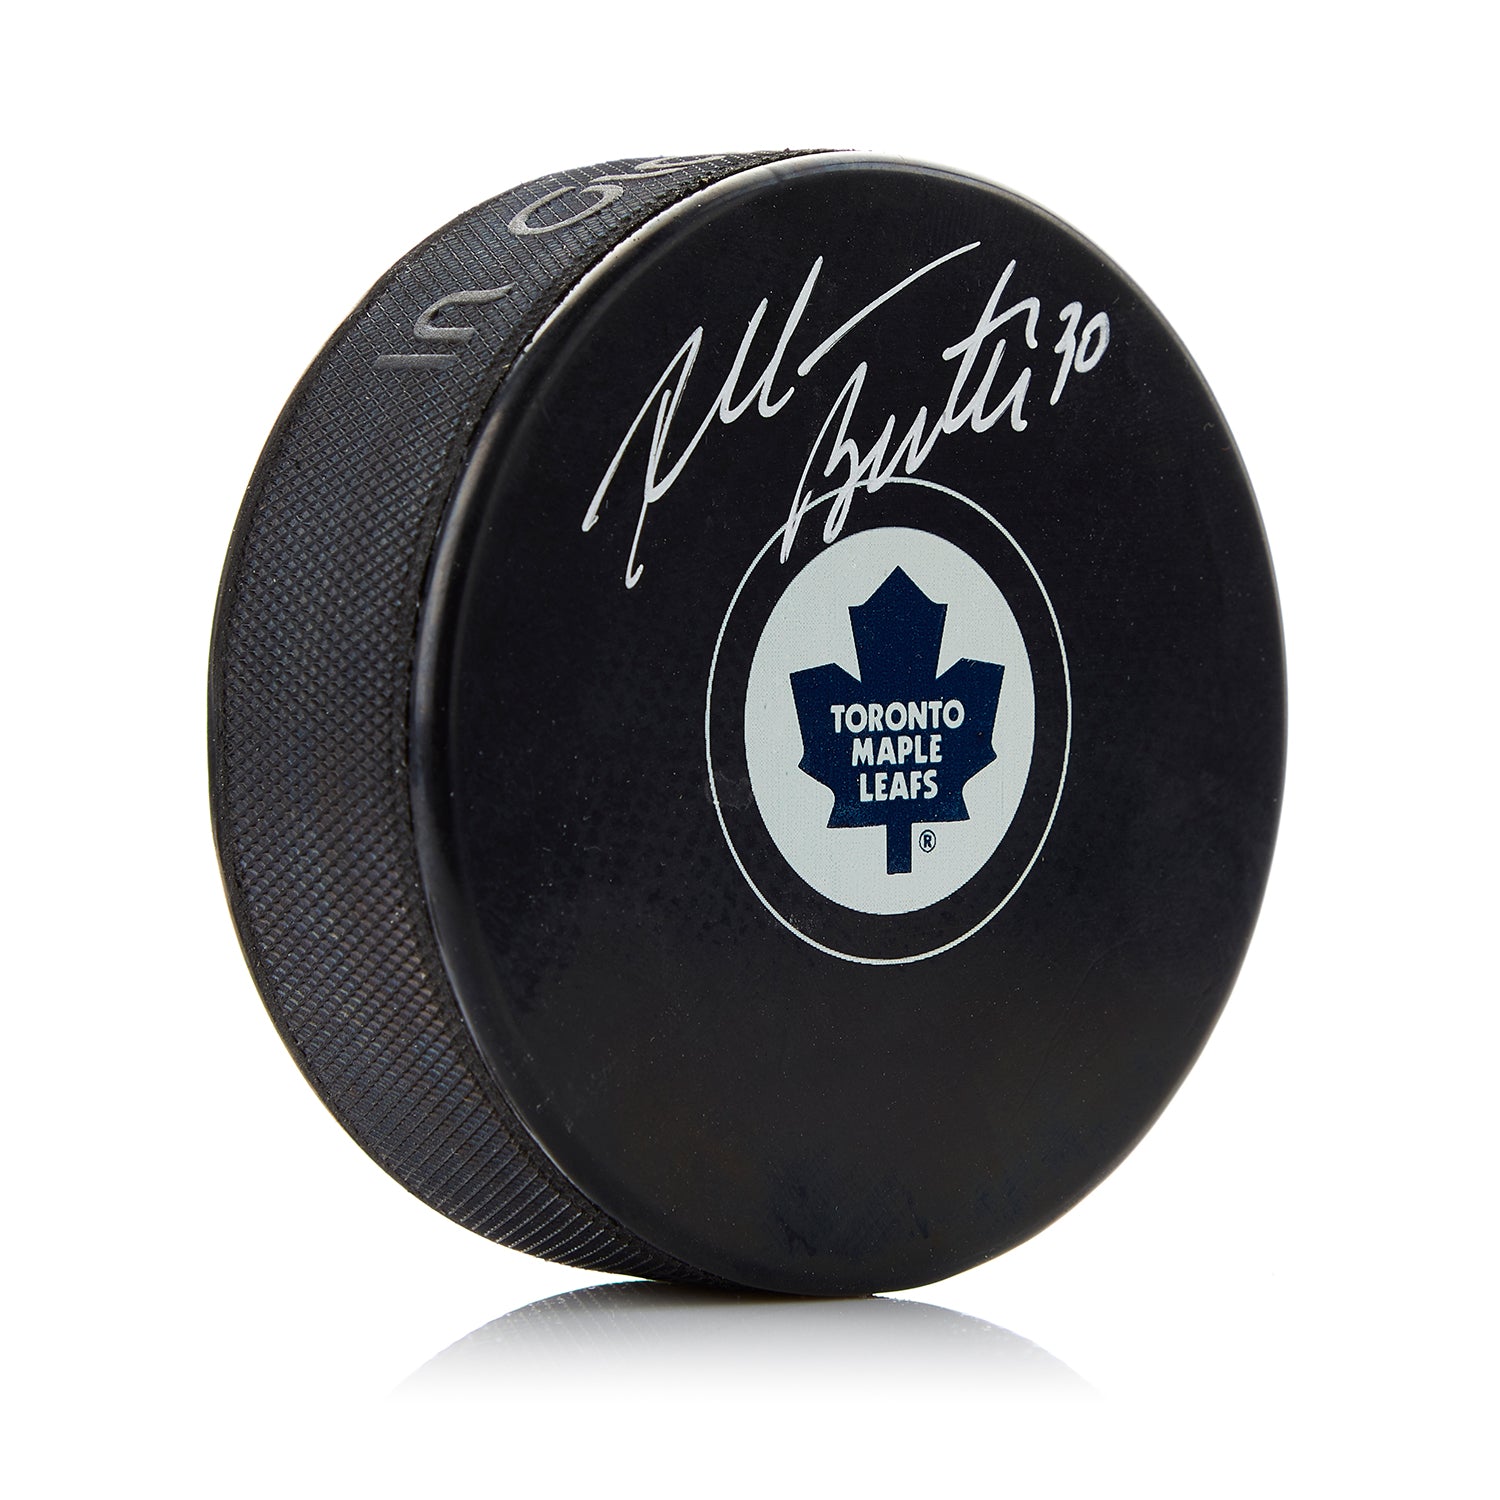 Allan Bester Toronto Maple Leafs Autographed Hockey Puck